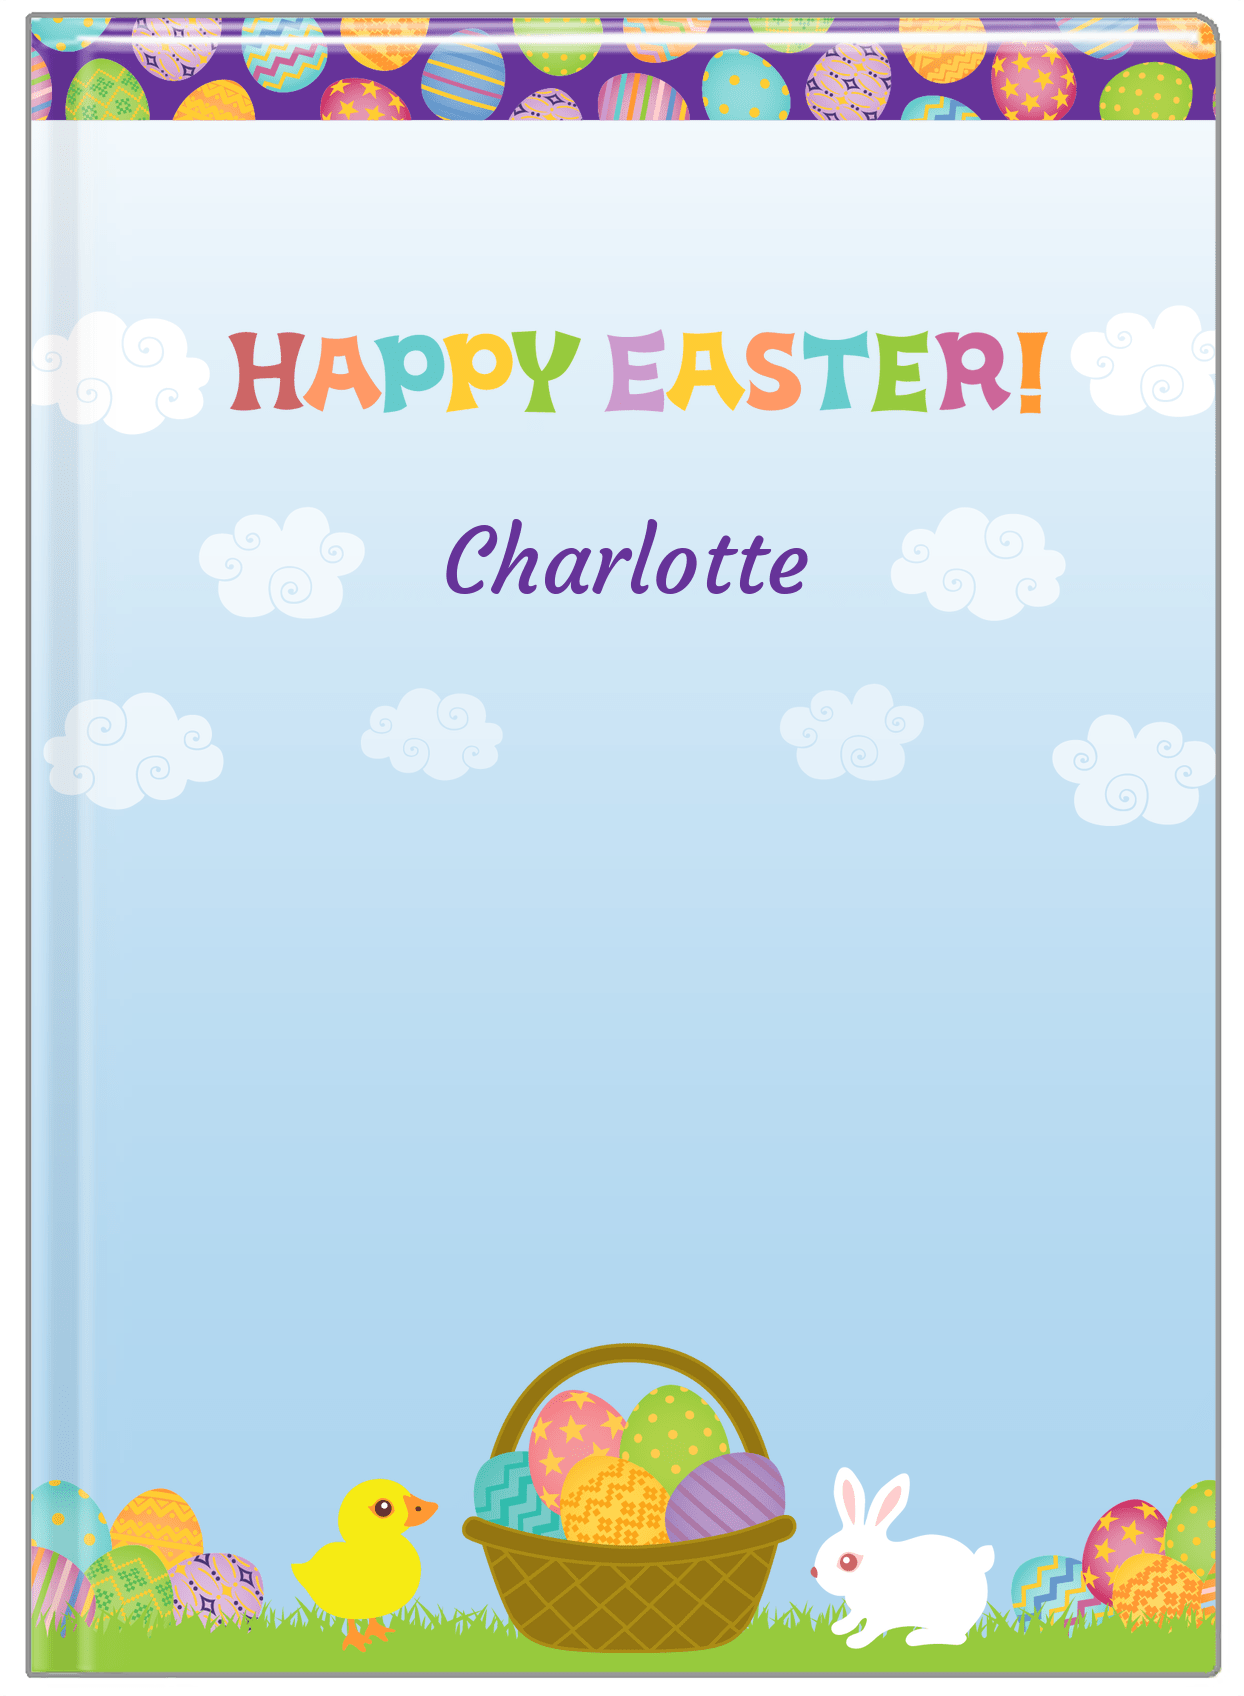 Personalized Easter Journal V - Easter Basket - Blue Background - Front View